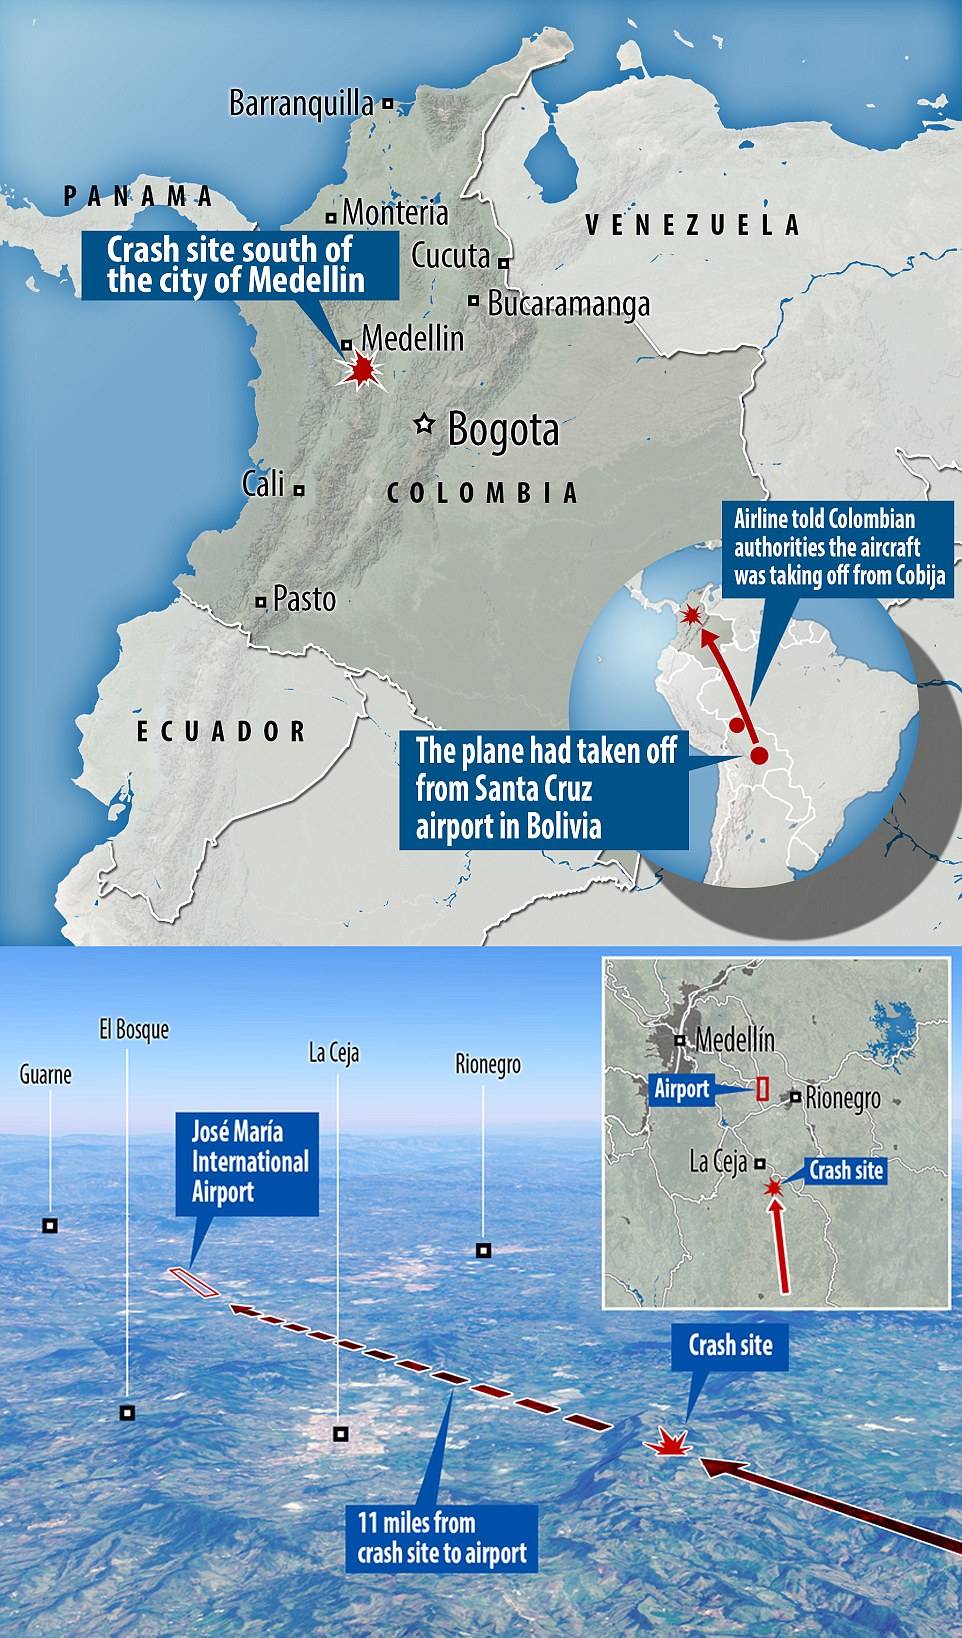 Colombian officials were told the doomed aircraft took off from Cobija, some 500 miles north of its actual departure point of Santa Cruz, meaning when it arrived in Medellin, it was running critically low on fuel, so when the jet was ordered to hold some 20 miles south of the airport, the pilot lost all power and crashed into a mountain 11 miles from the runway 